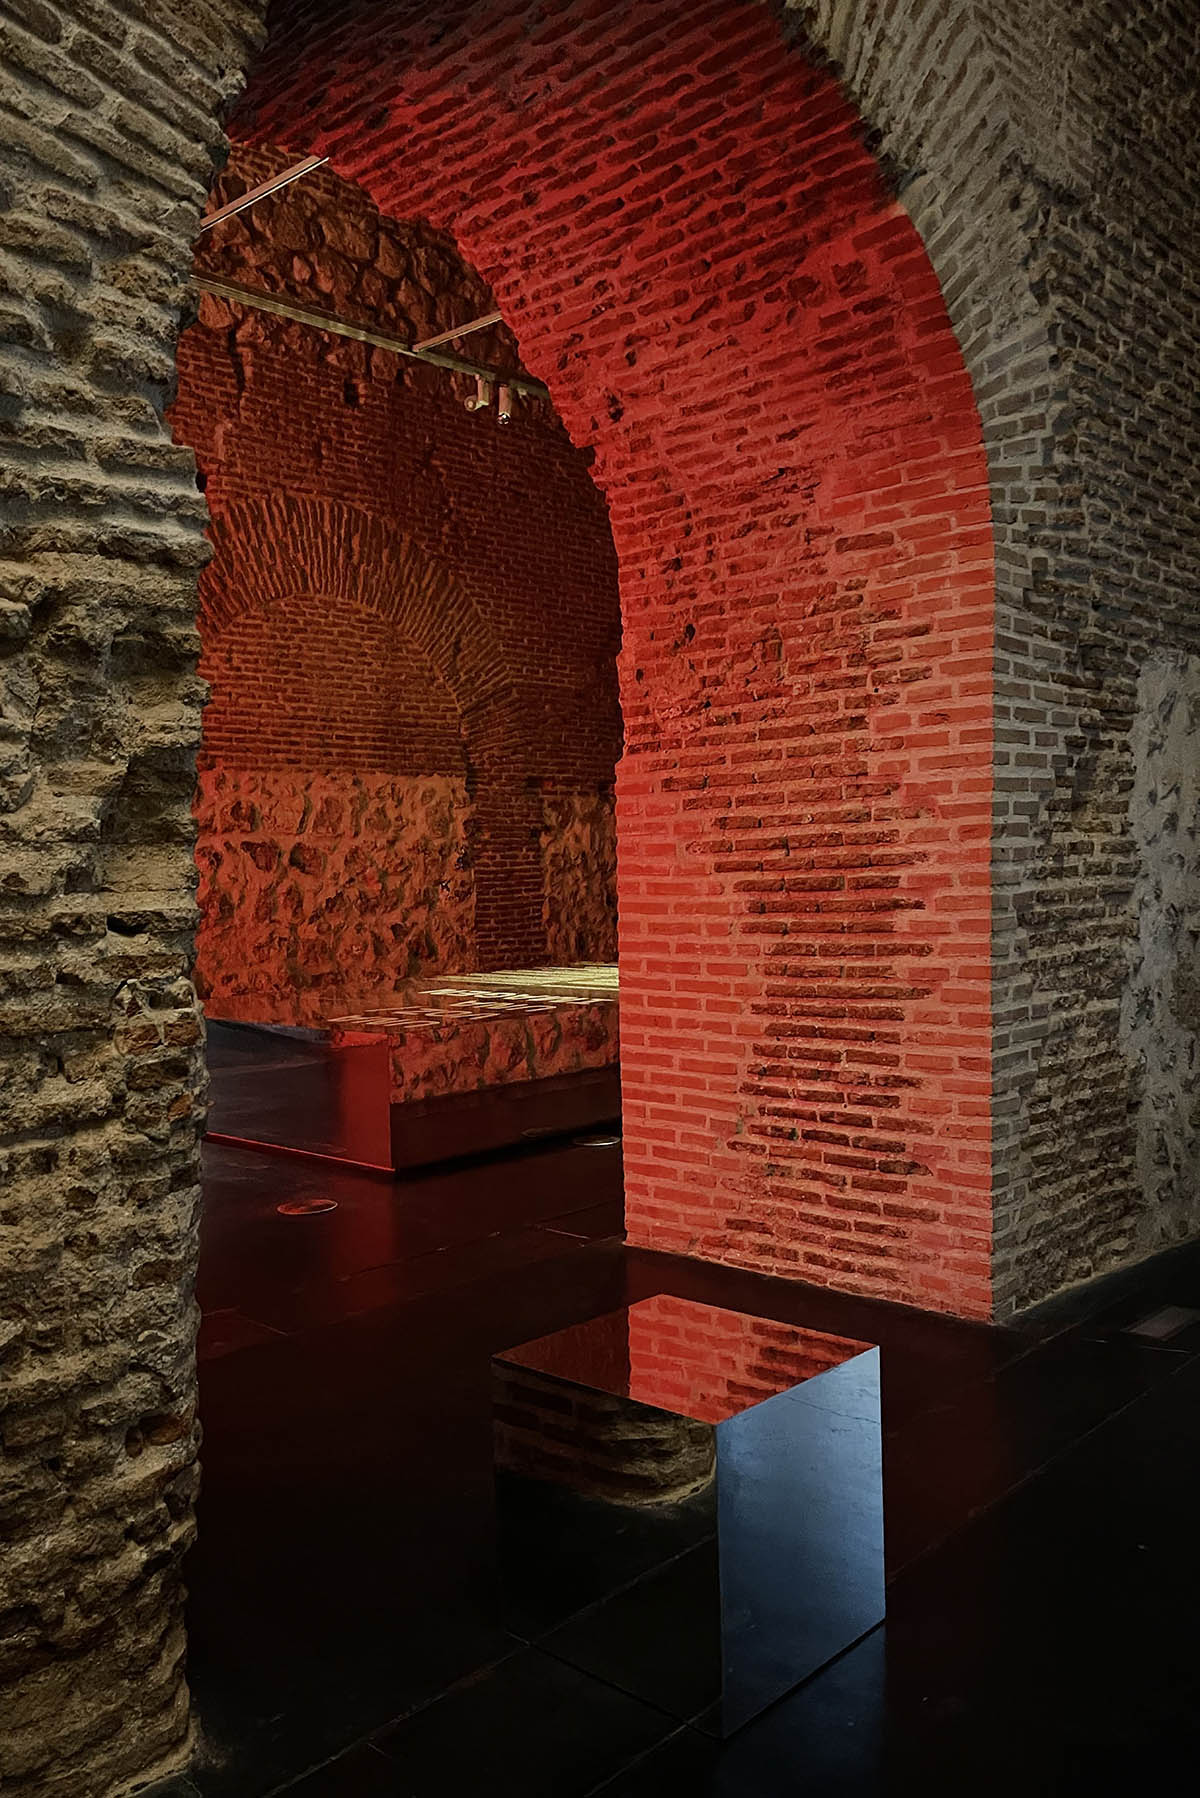 Exhibition design at Condeduque Center’s vaulted hall plays with red light, mirrors and reflections